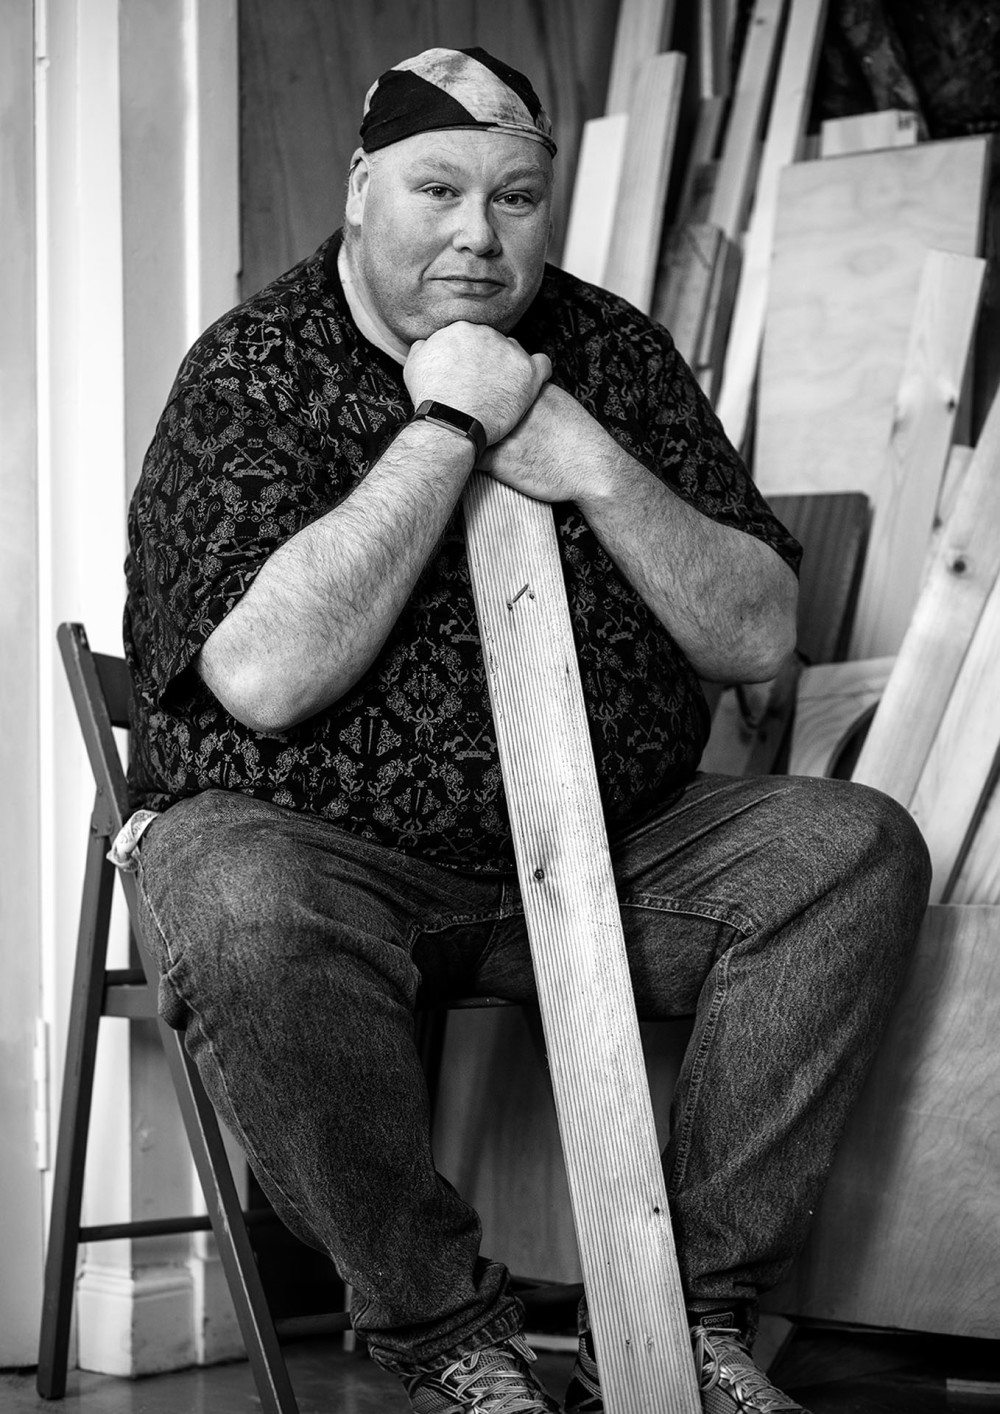 Robert, service user at Men's Shed, Paisley. Photographed for Shelter Scotland's 50th anniversary by Melissa Mitchell.